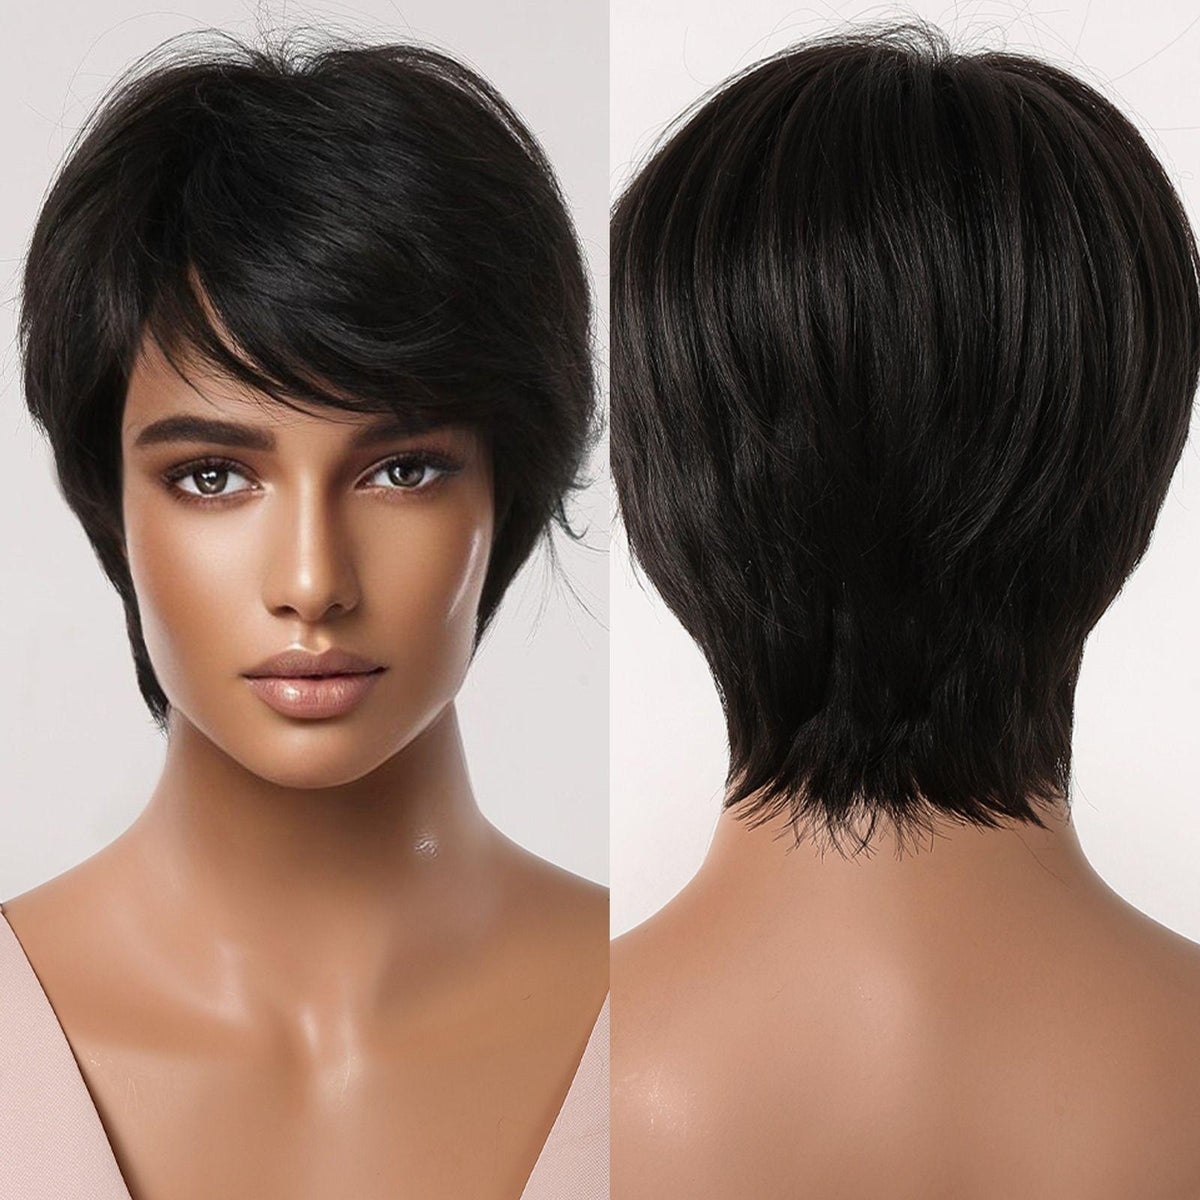 【Ellie 45】BUY 3 wigs pay 2 wigs 8 Inches Short Black Wigs Pixie Cut Wigs for Women Daily or Cosplay Use LC2065-1